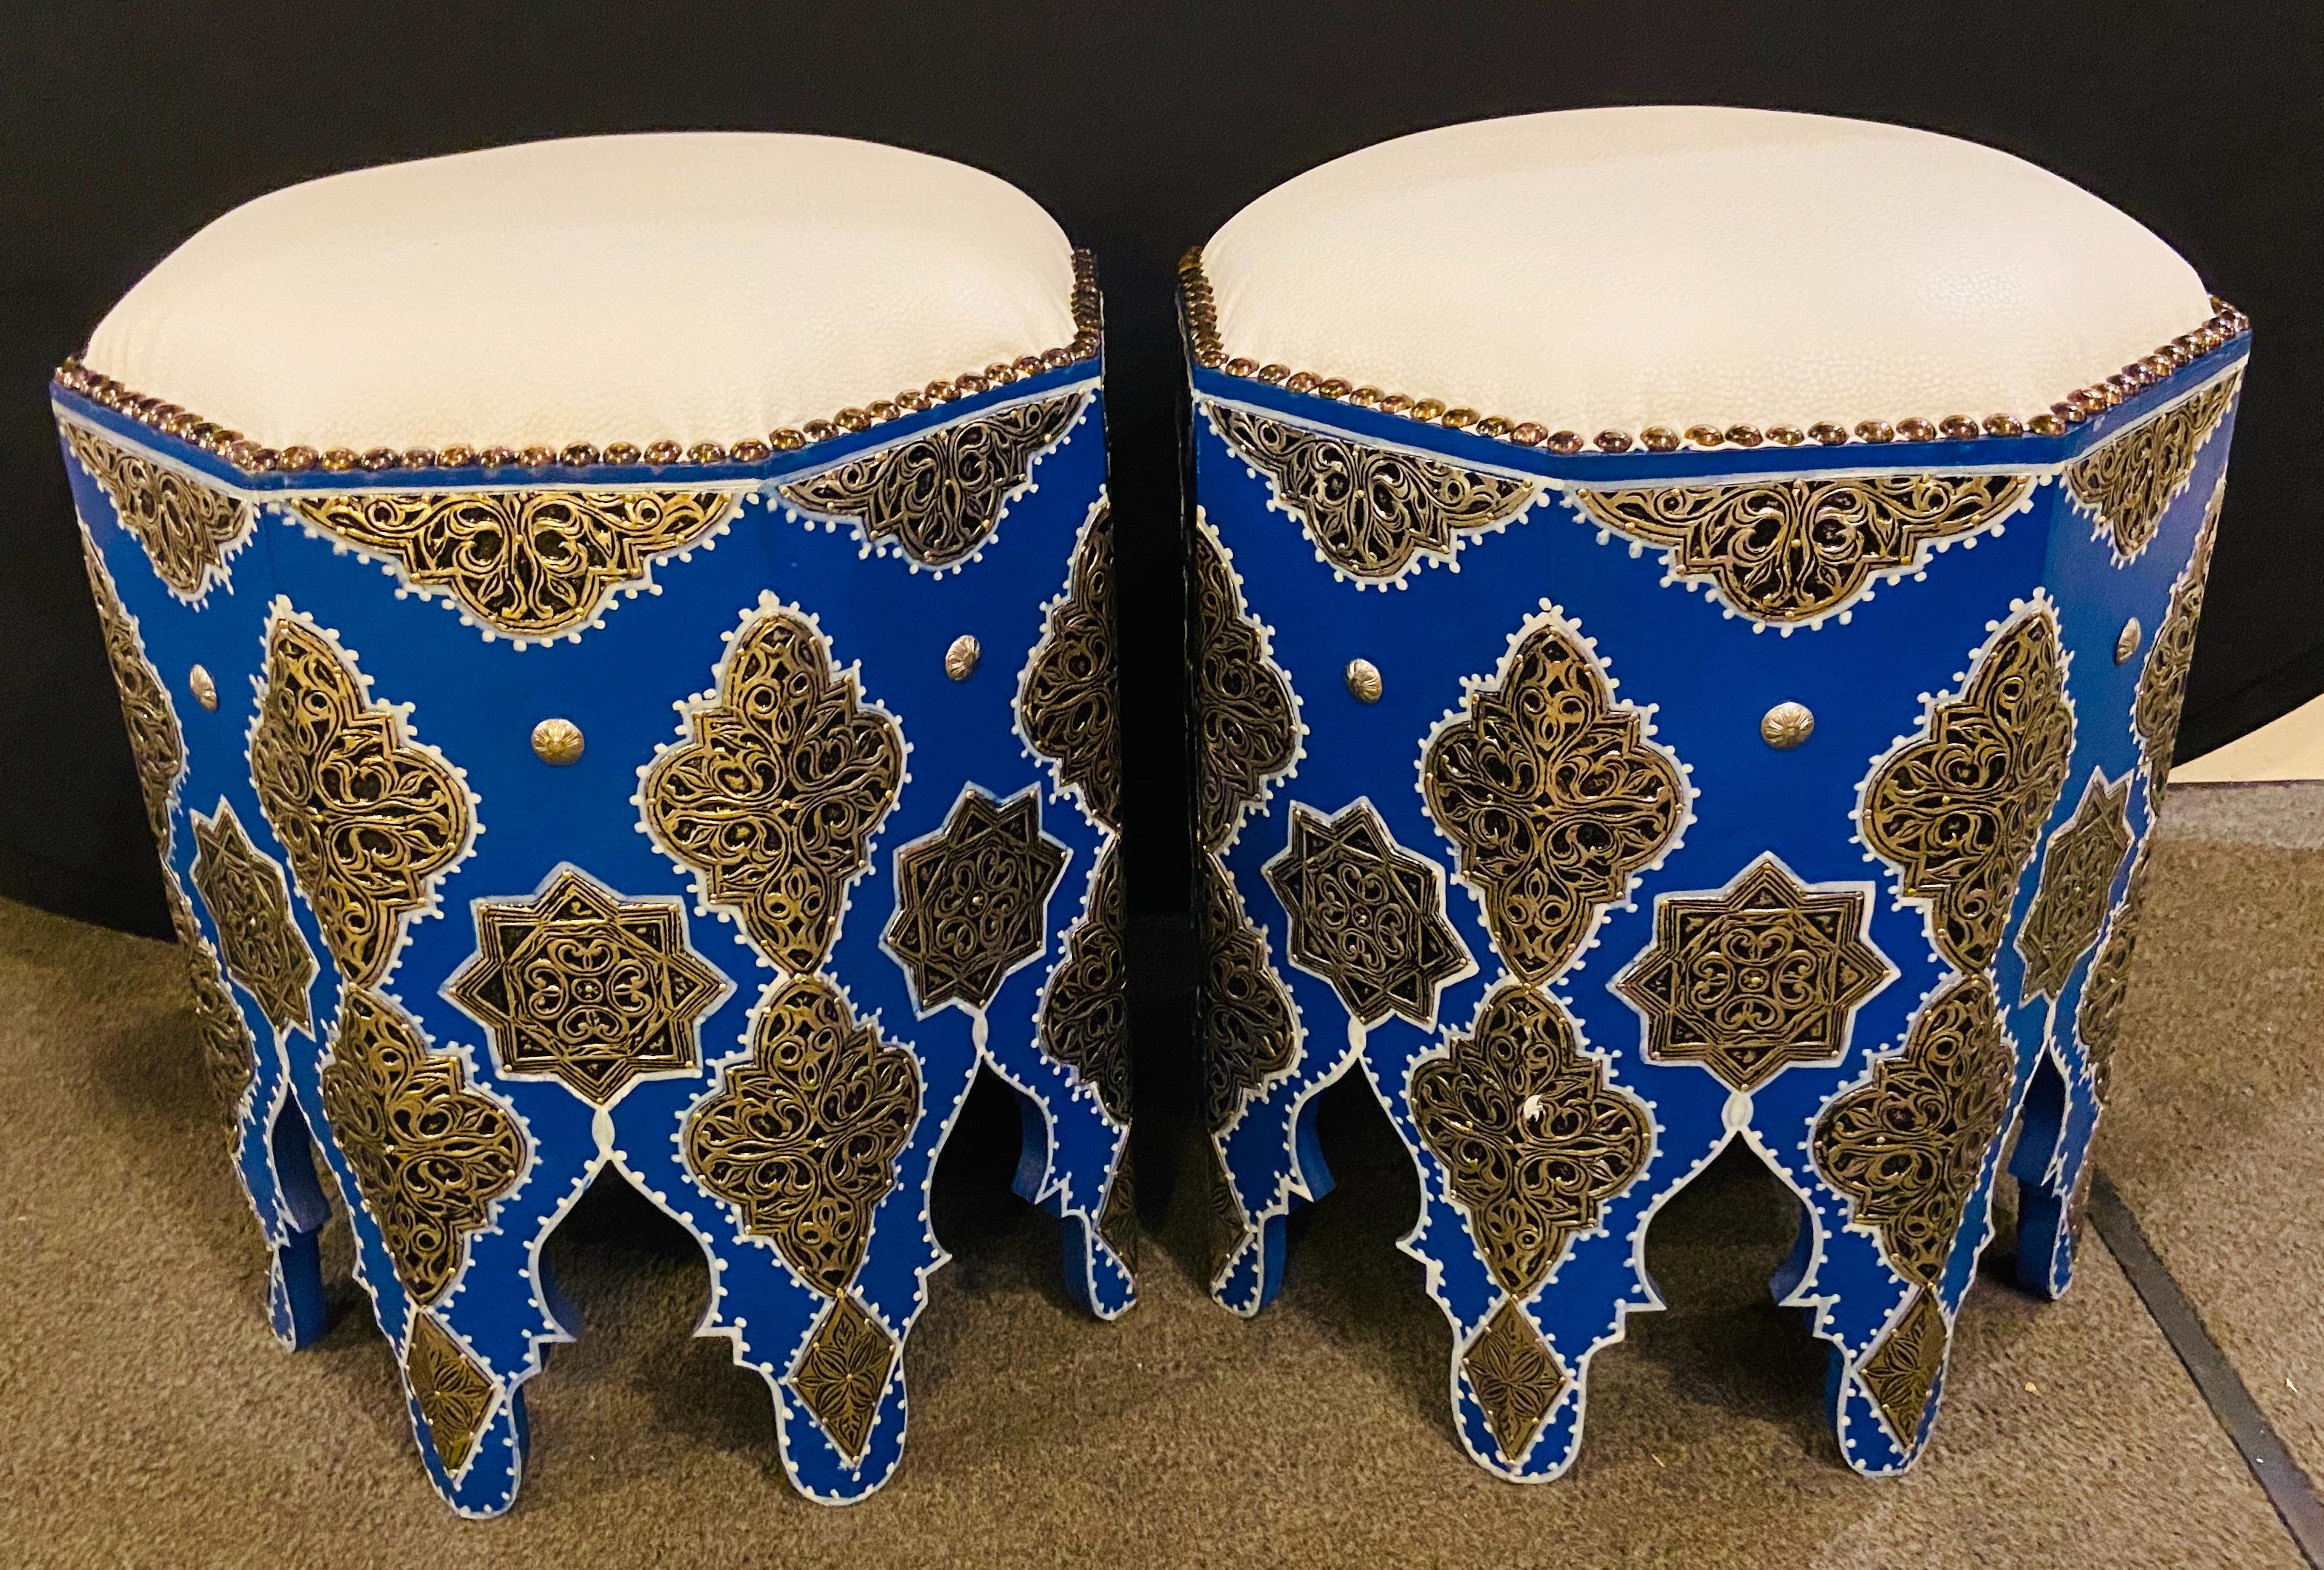 Boho Chic Moroccan Blue Majorelle Stool or Ottoman with White Leather Top, Pair For Sale 1